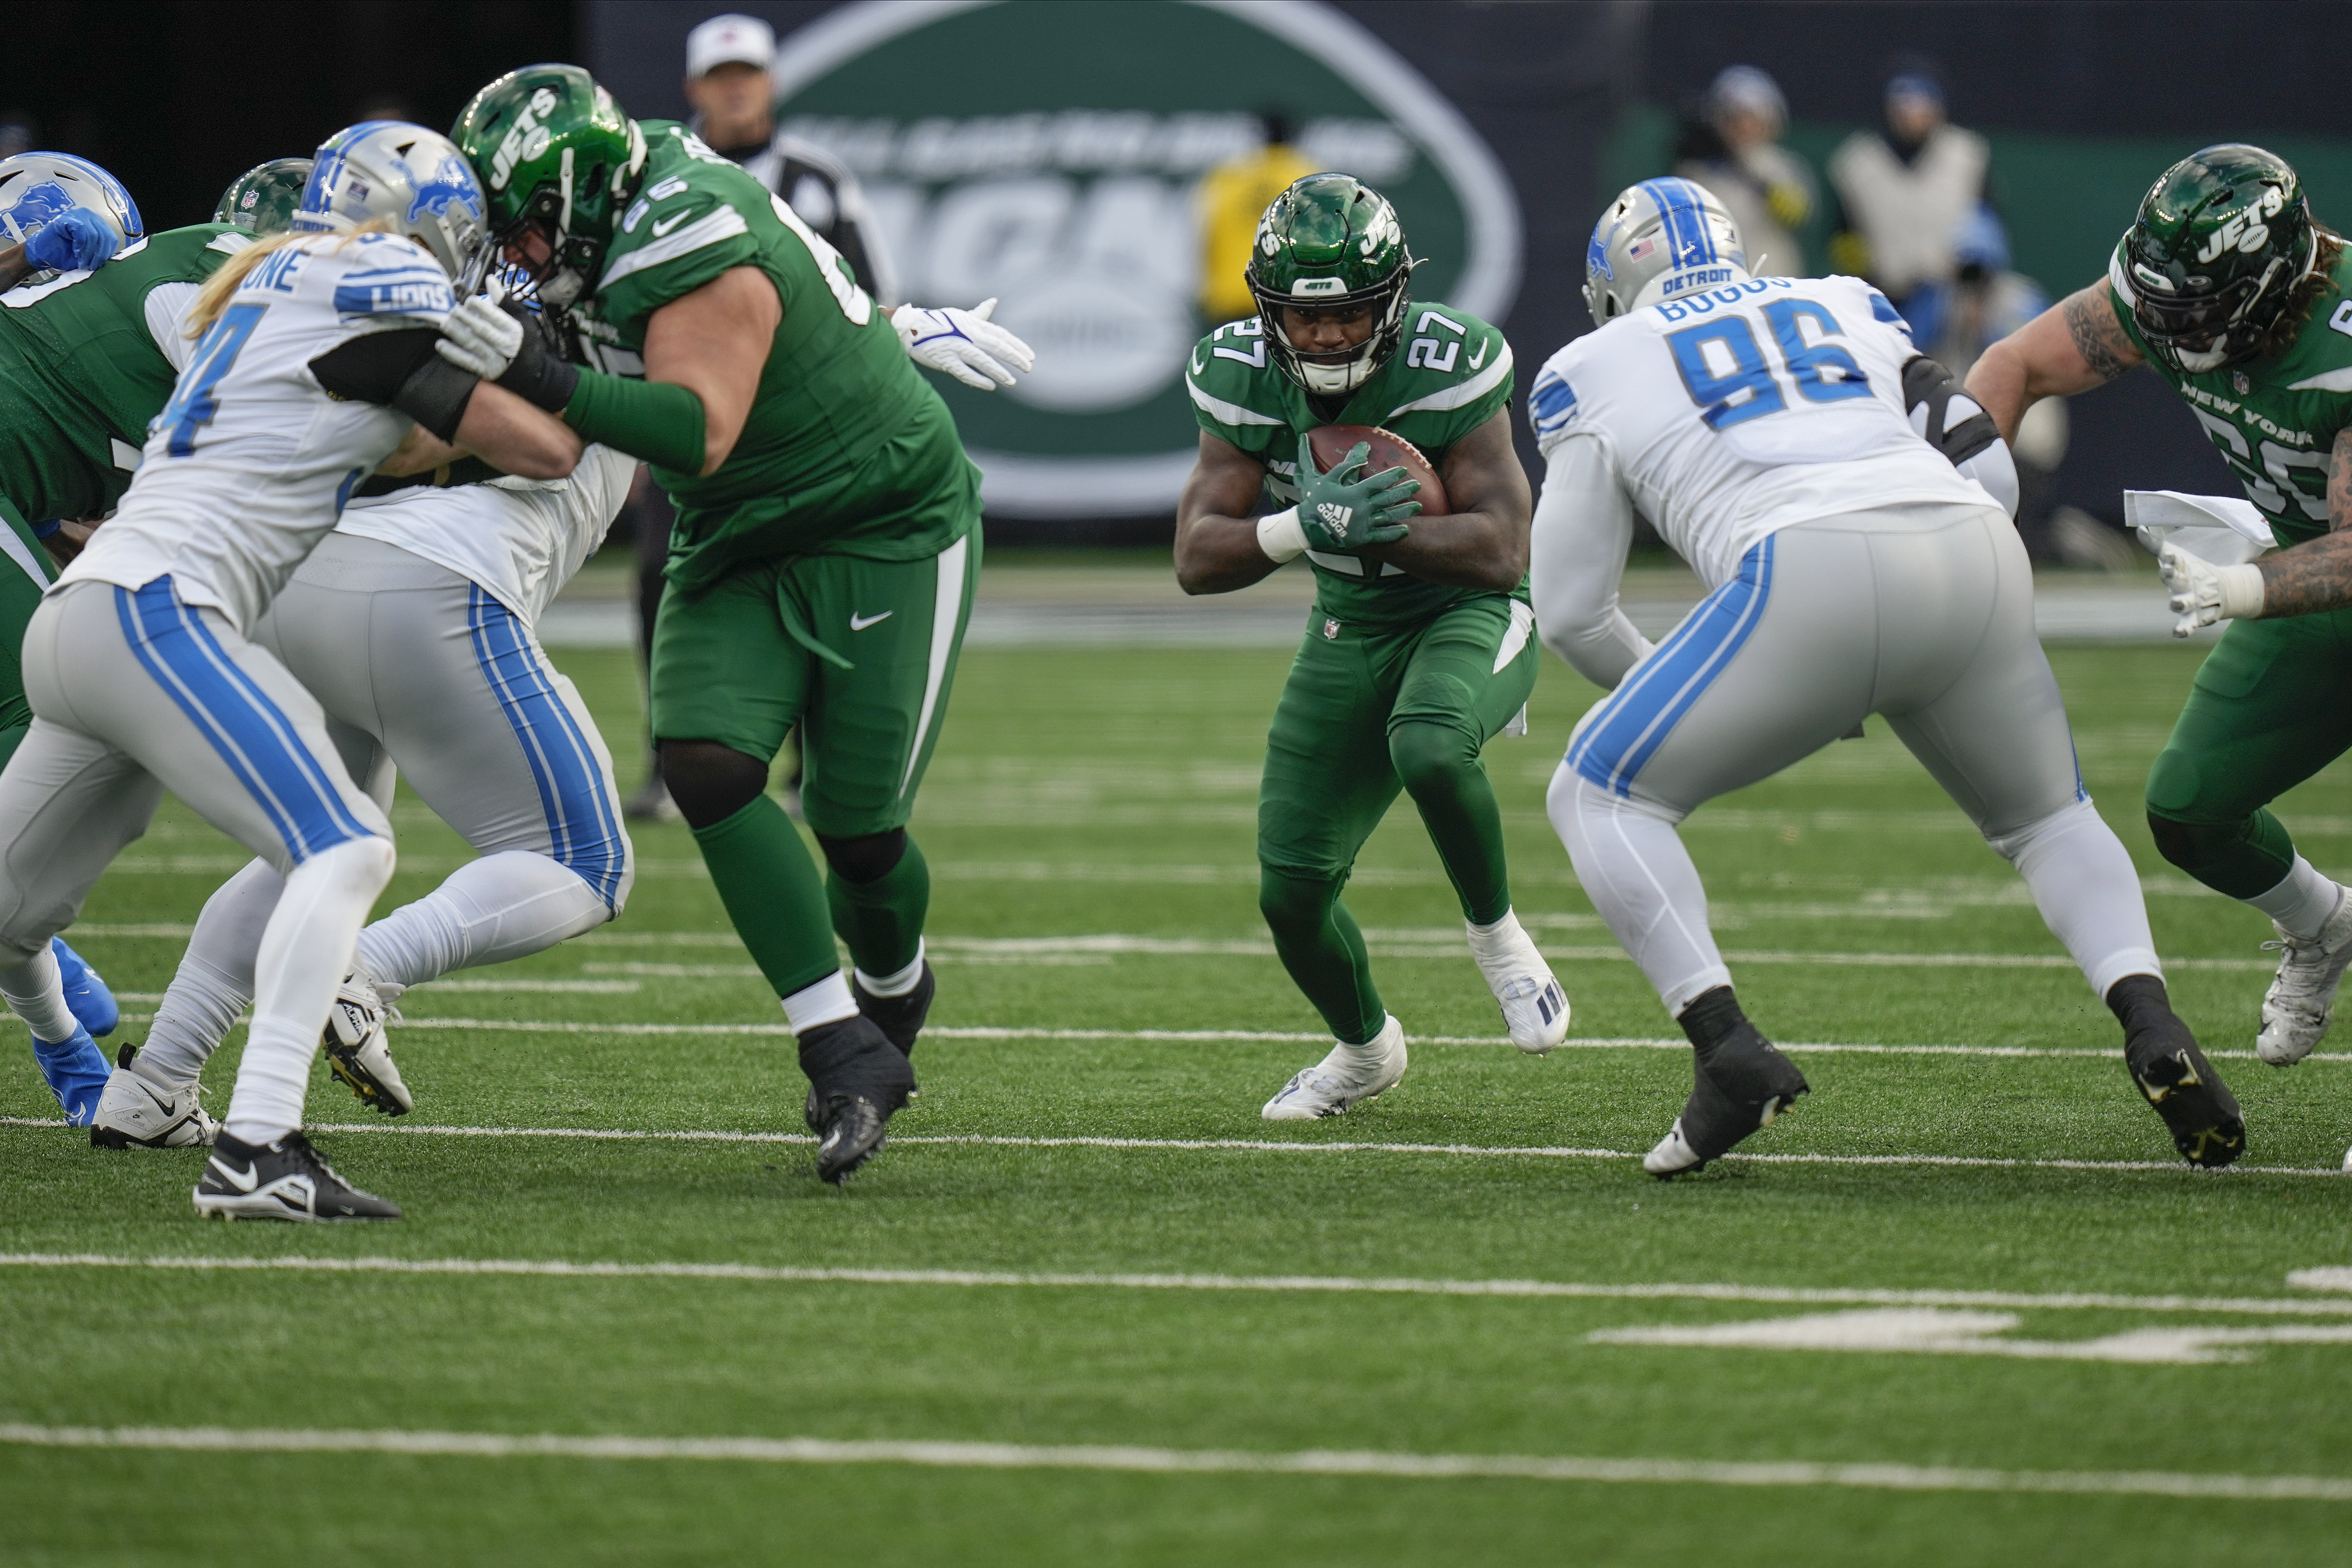 Lions grades: Defense erases Jets' rushing attack, wreaks havoc in